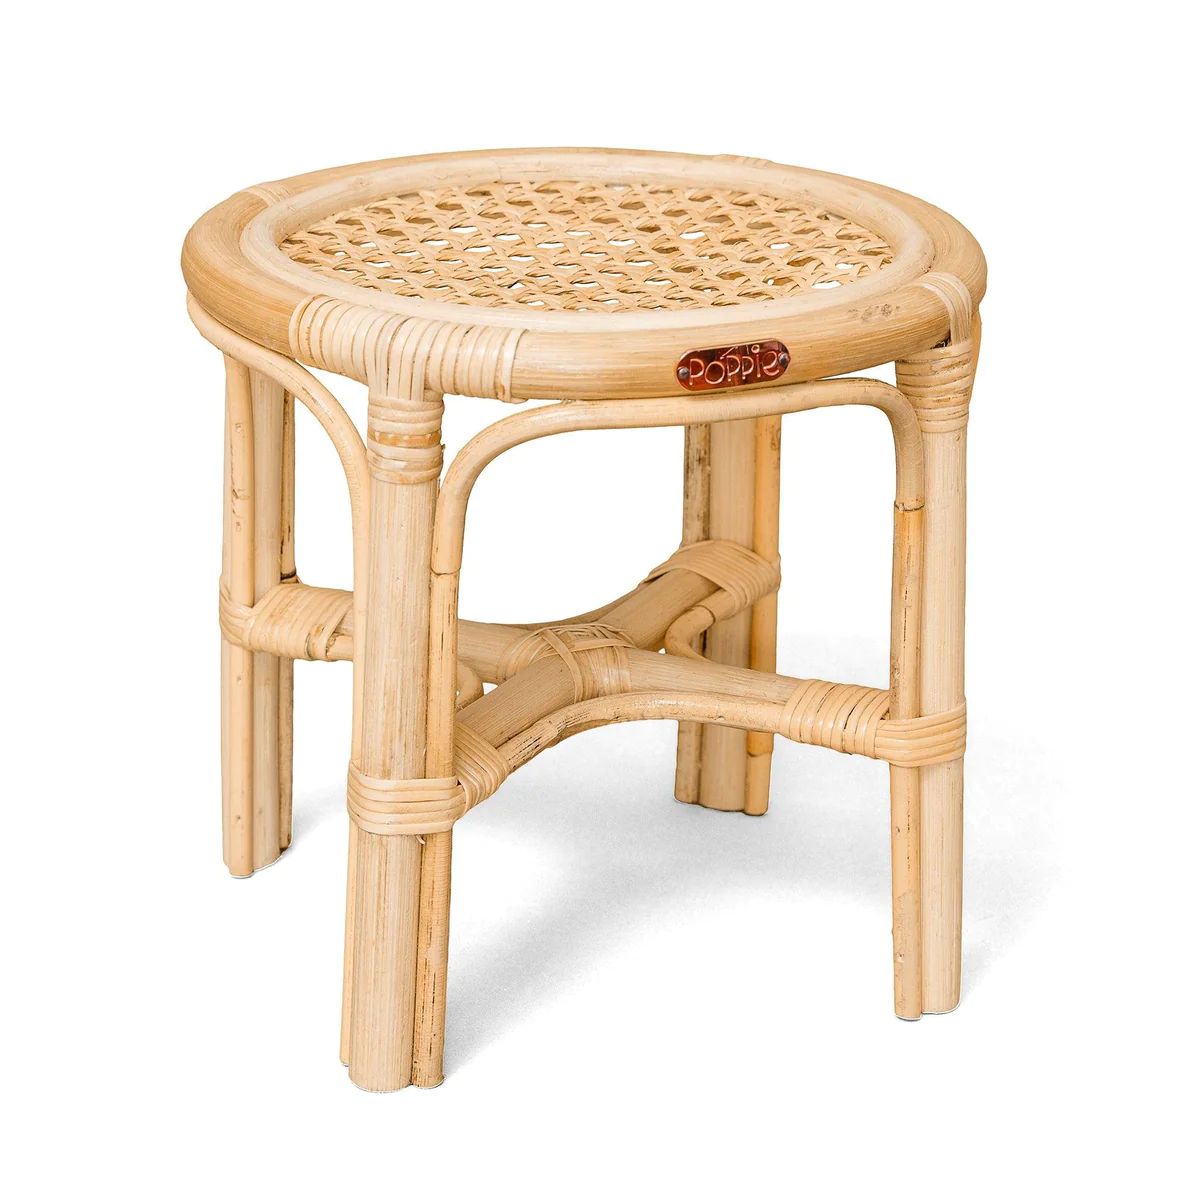 Poppie Mini Table | The Well Appointed House, LLC